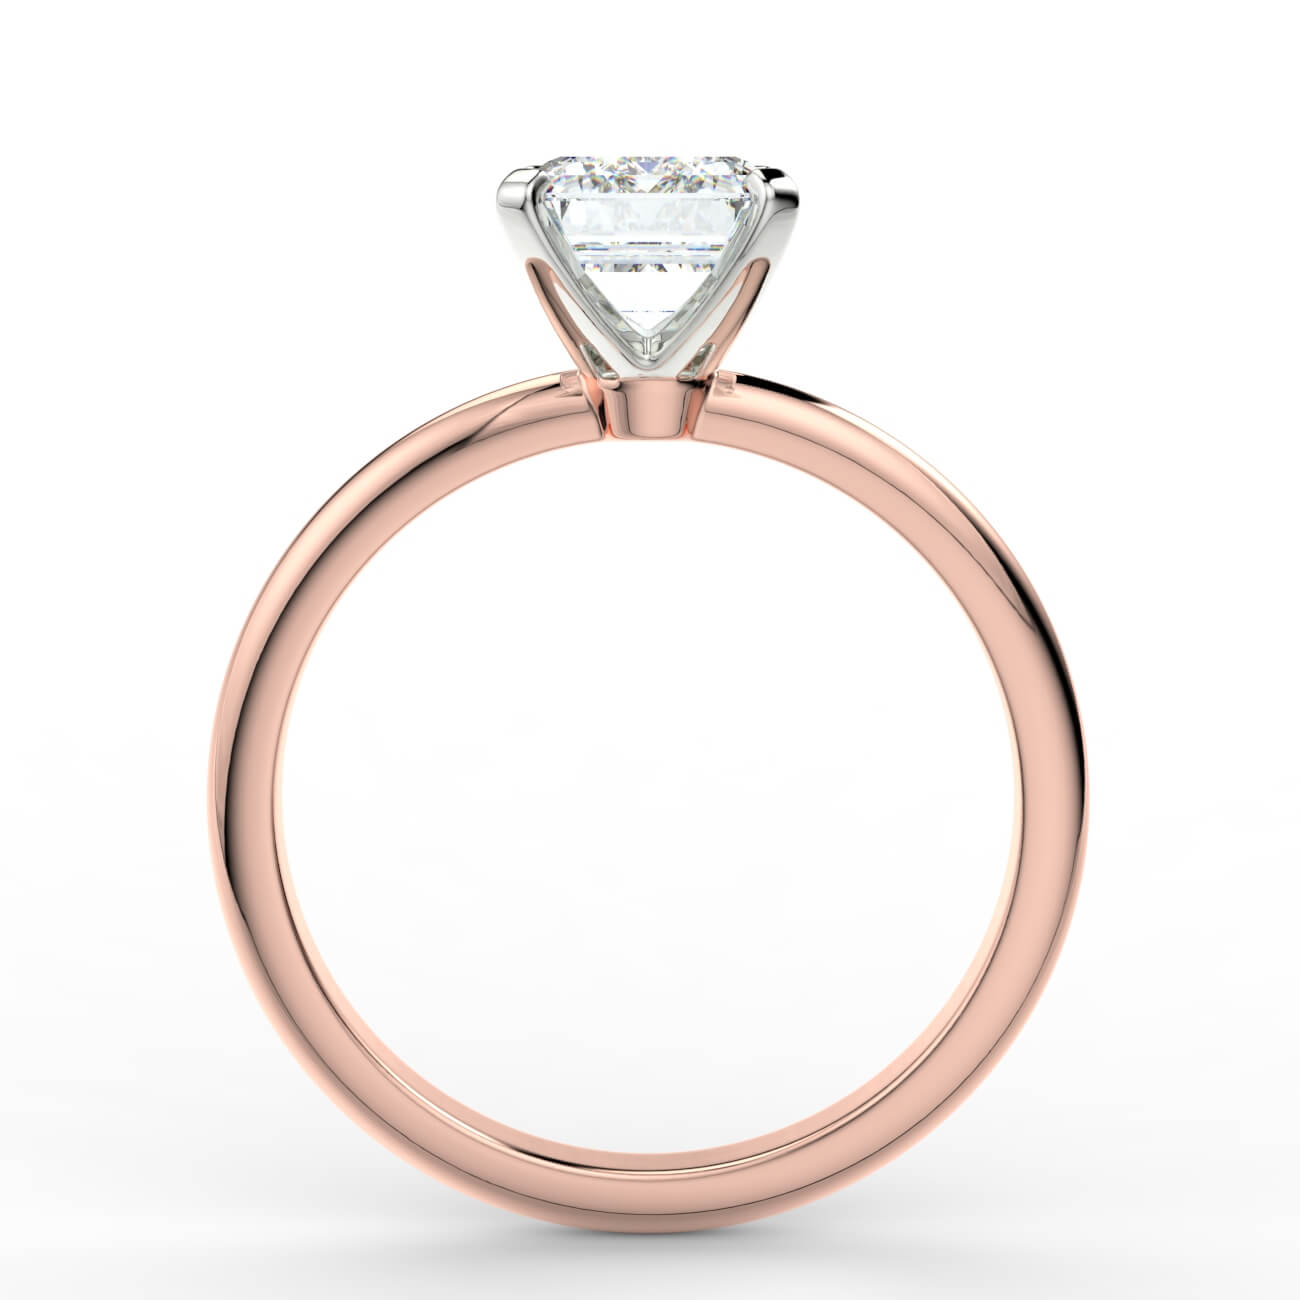 Knife-edge solitaire emerald cut diamond engagement ring in rose and white gold – Australian Diamond Network